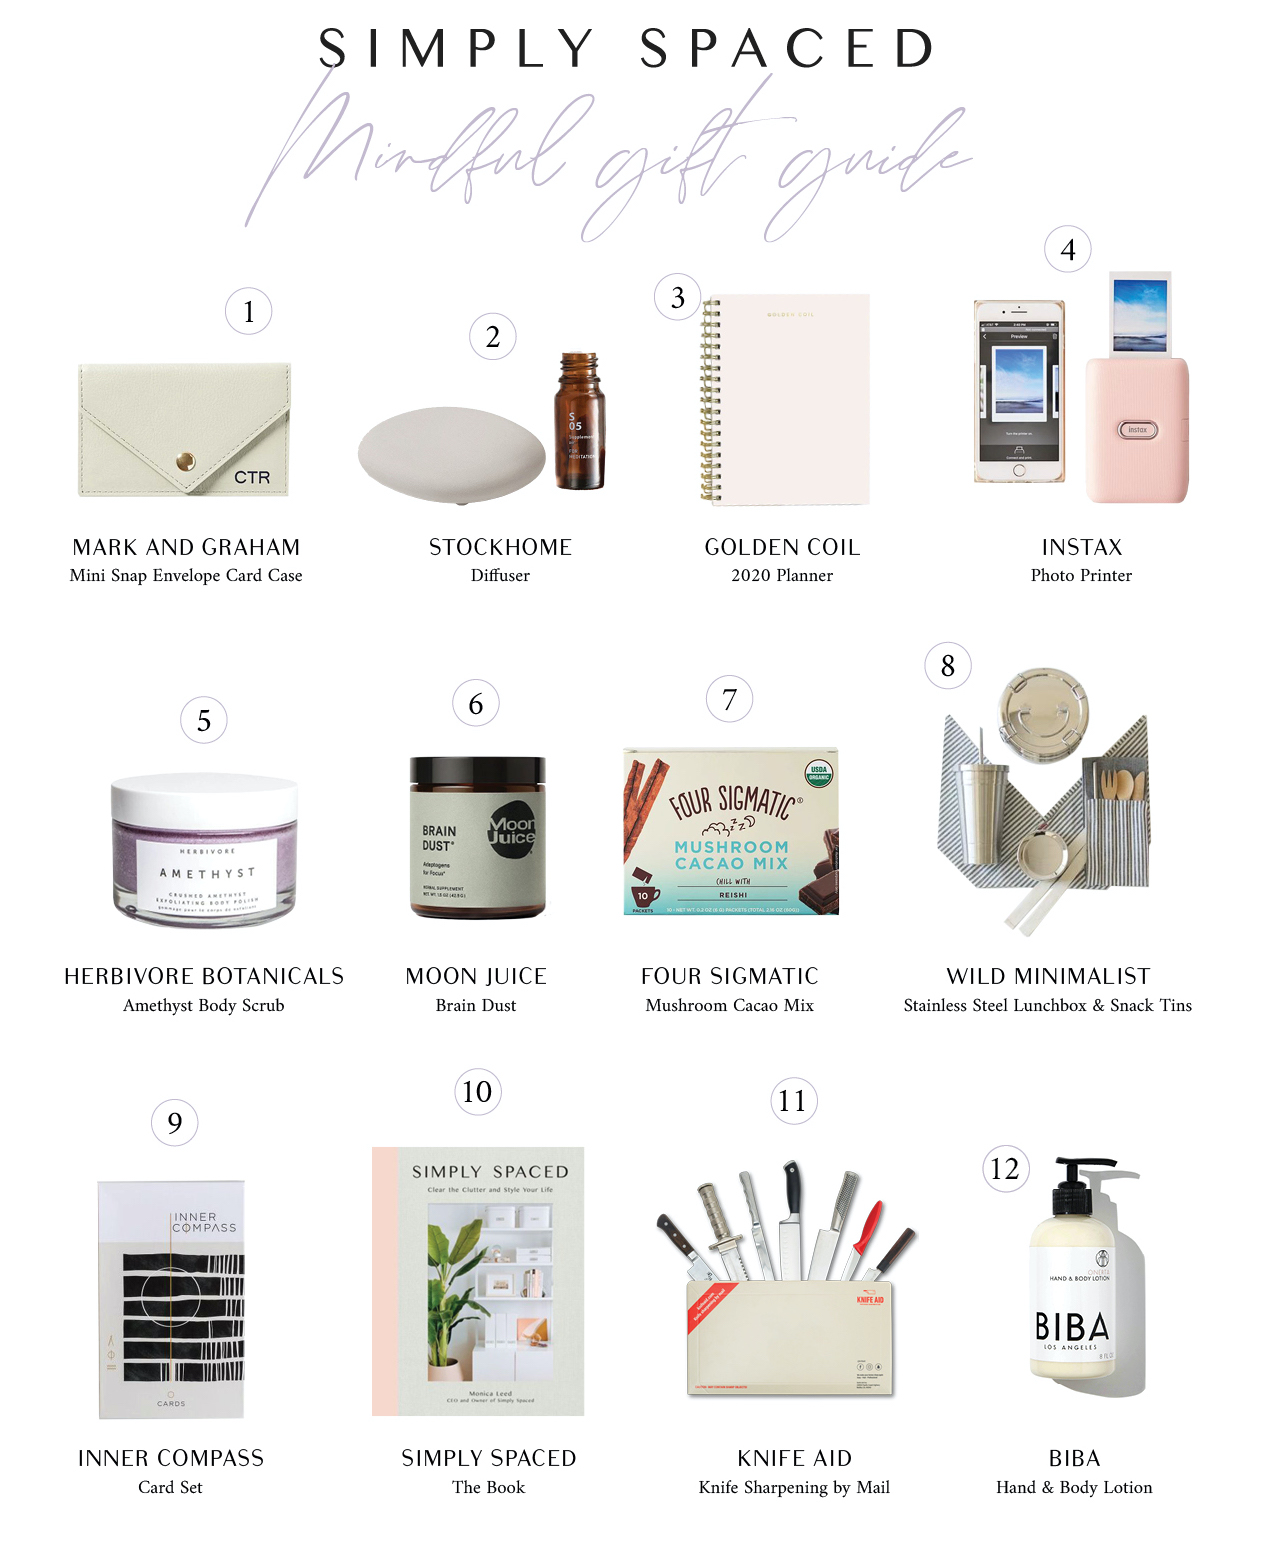 The Simply Spaced Mindful Gift Guide.